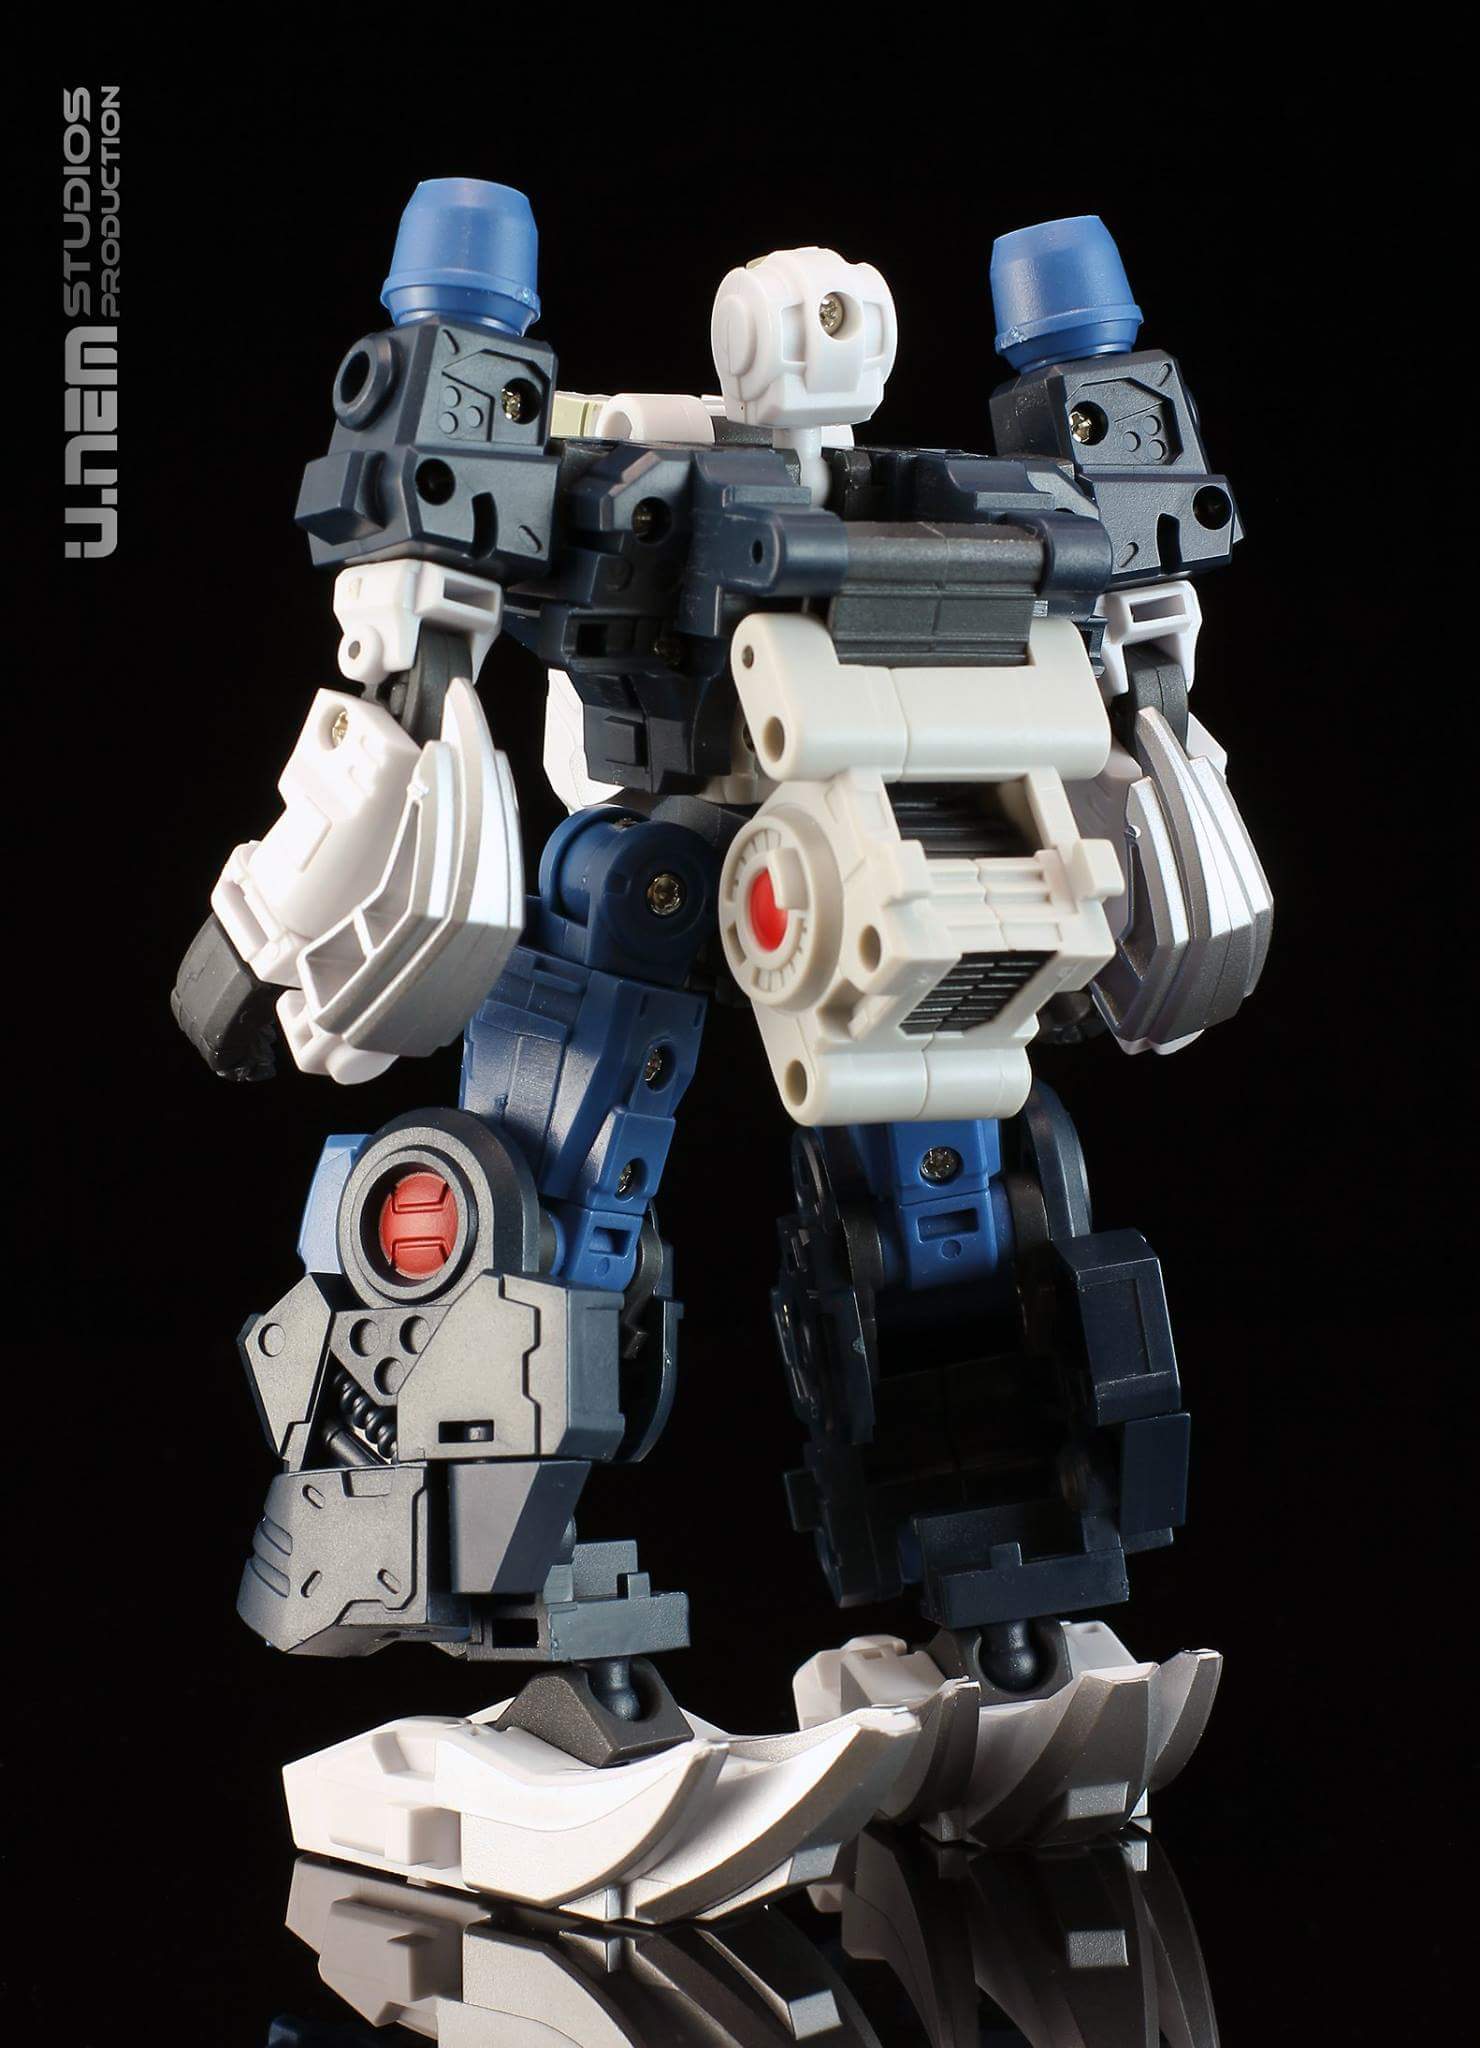 [FansProject] Produit Tiers - Ryu-Oh aka Dinoking (Victory) | Beastructor aka Monstructor (USA) - Page 3 9HPbi4Jx